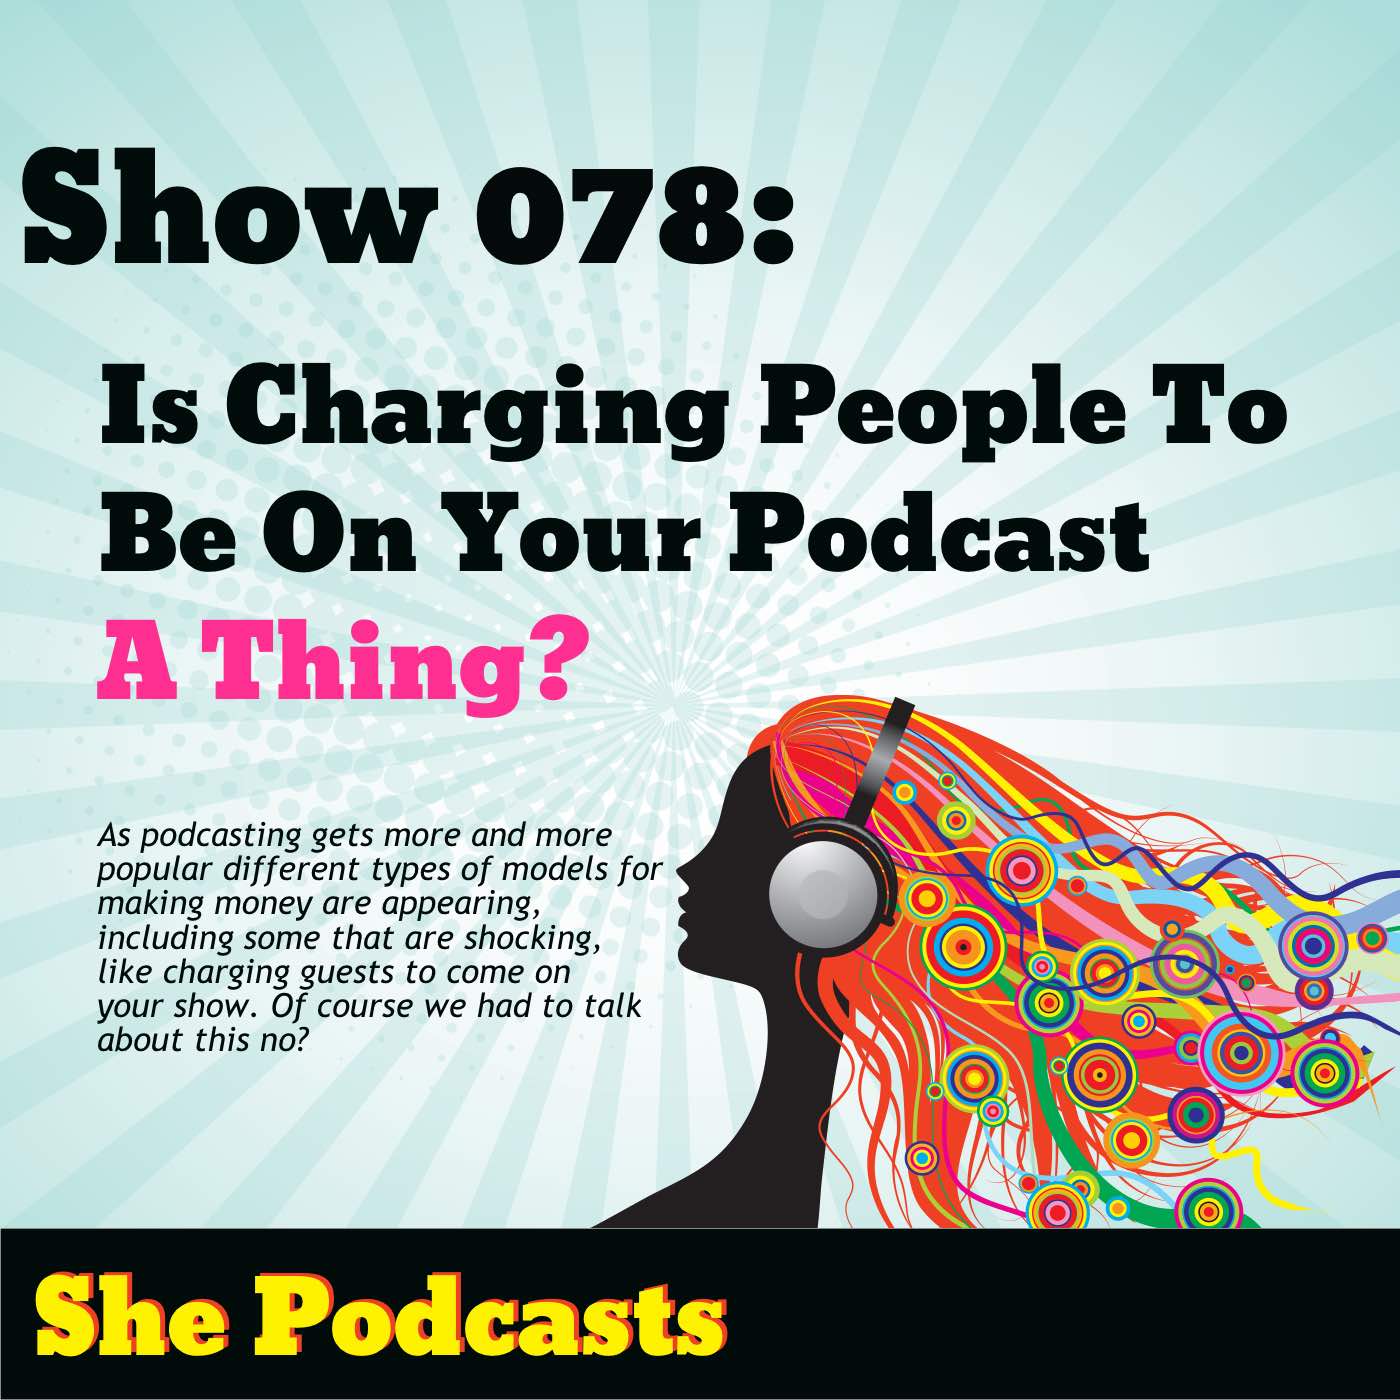 Is charging people to be on your podcast a thing